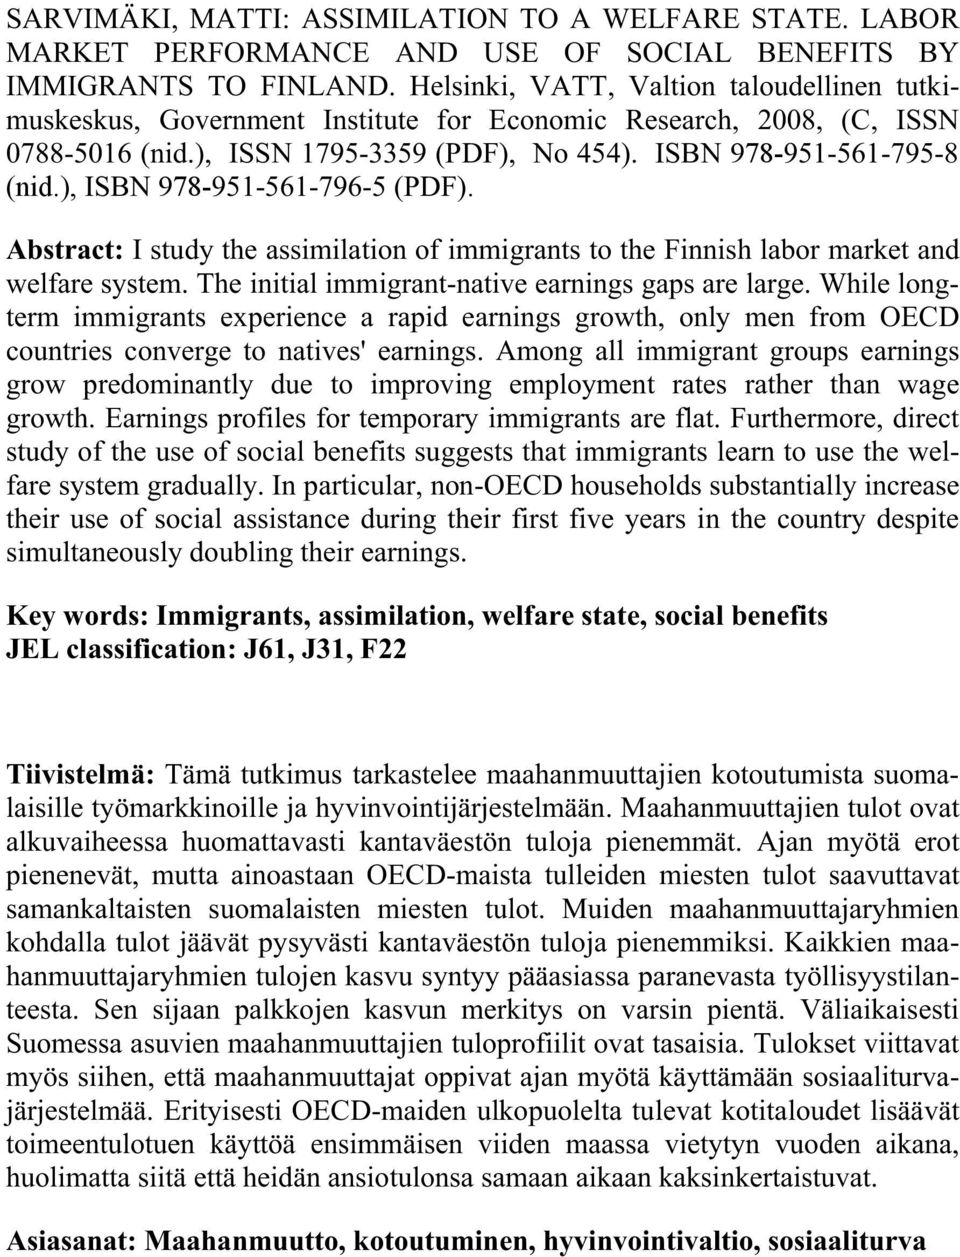 ), ISBN 978-951-561-796-5 (PDF). Abstract: I study the assimilation of immigrants to the Finnish labor market and welfare system. The initial immigrant-native earnings gaps are large.